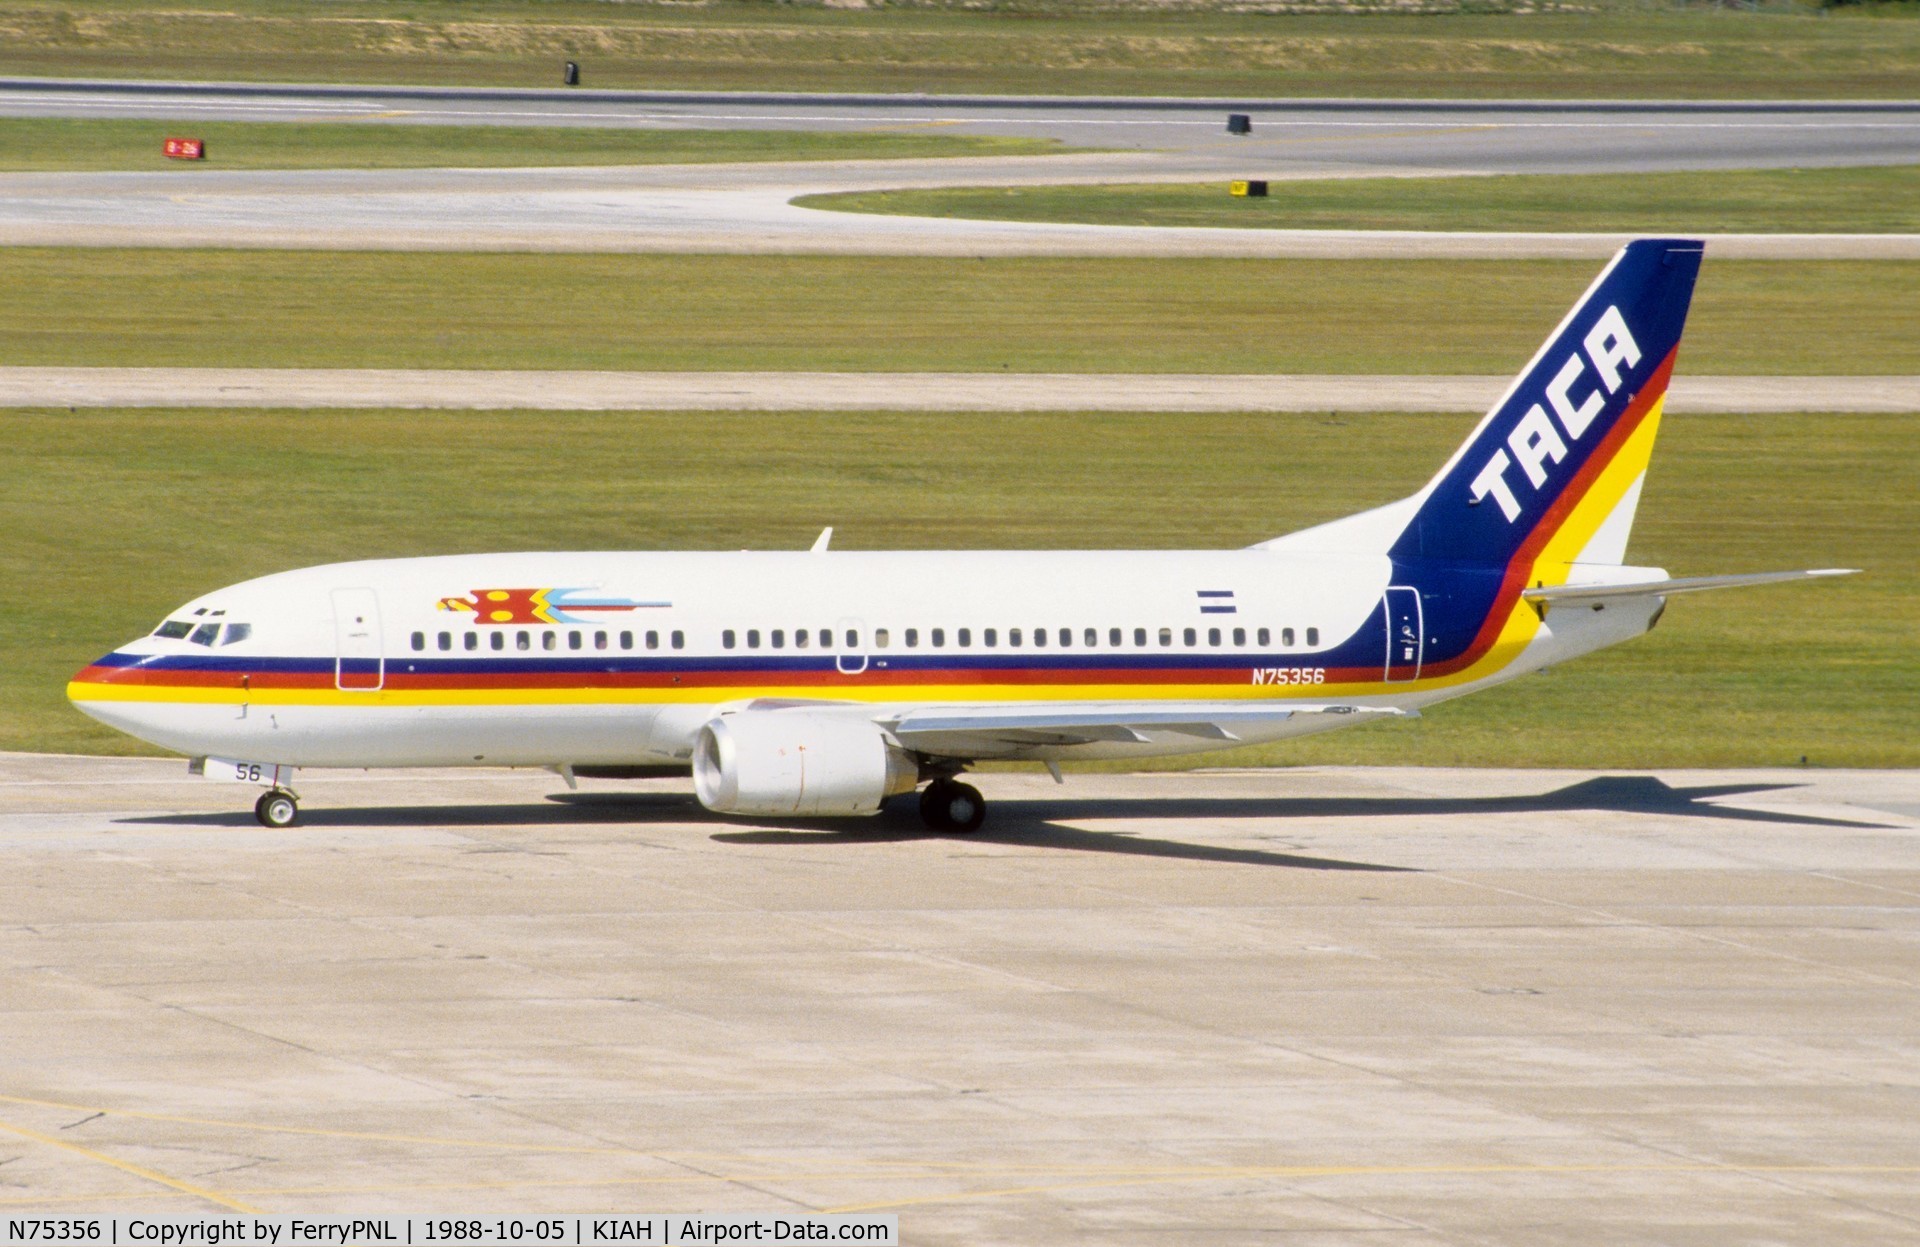 N75356, 1988 Boeing 737-3T0 C/N 23838, This Taca B733 made an emergency landing in New Orleans  when both engines flamed-out in a storm in 1988 just 2 weeks after delivery.